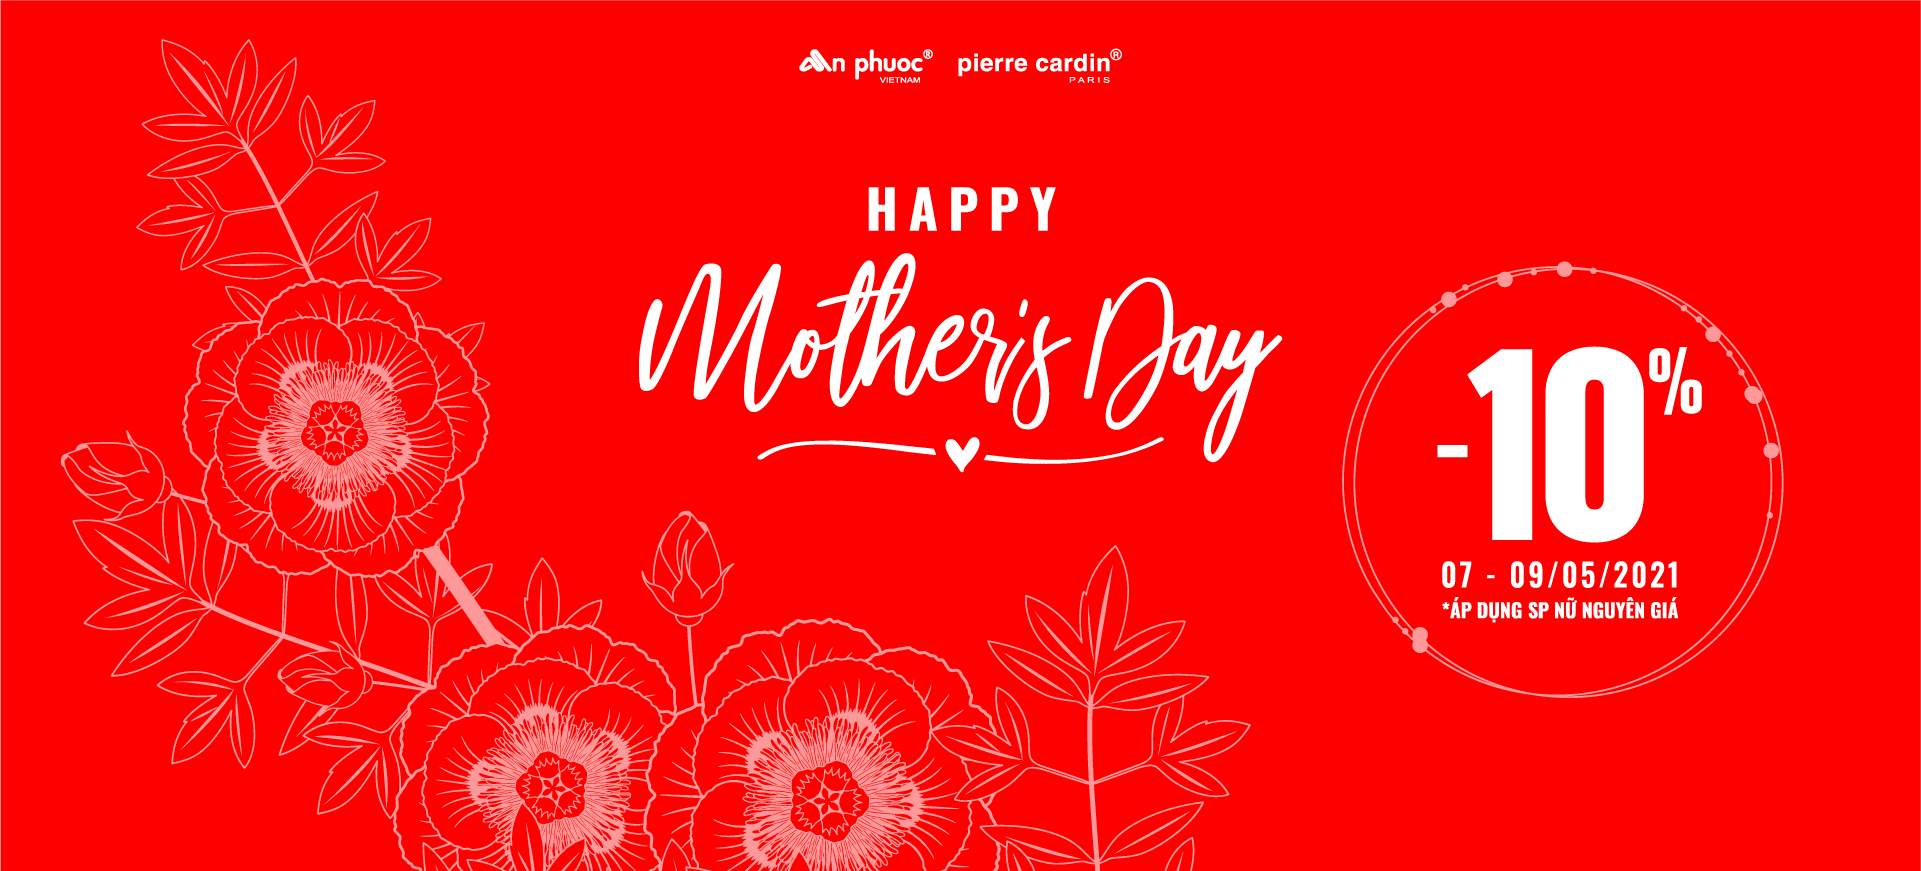 AN PHƯỚC - PIERRE CARDIN HAPPY MOTHER'S DAY